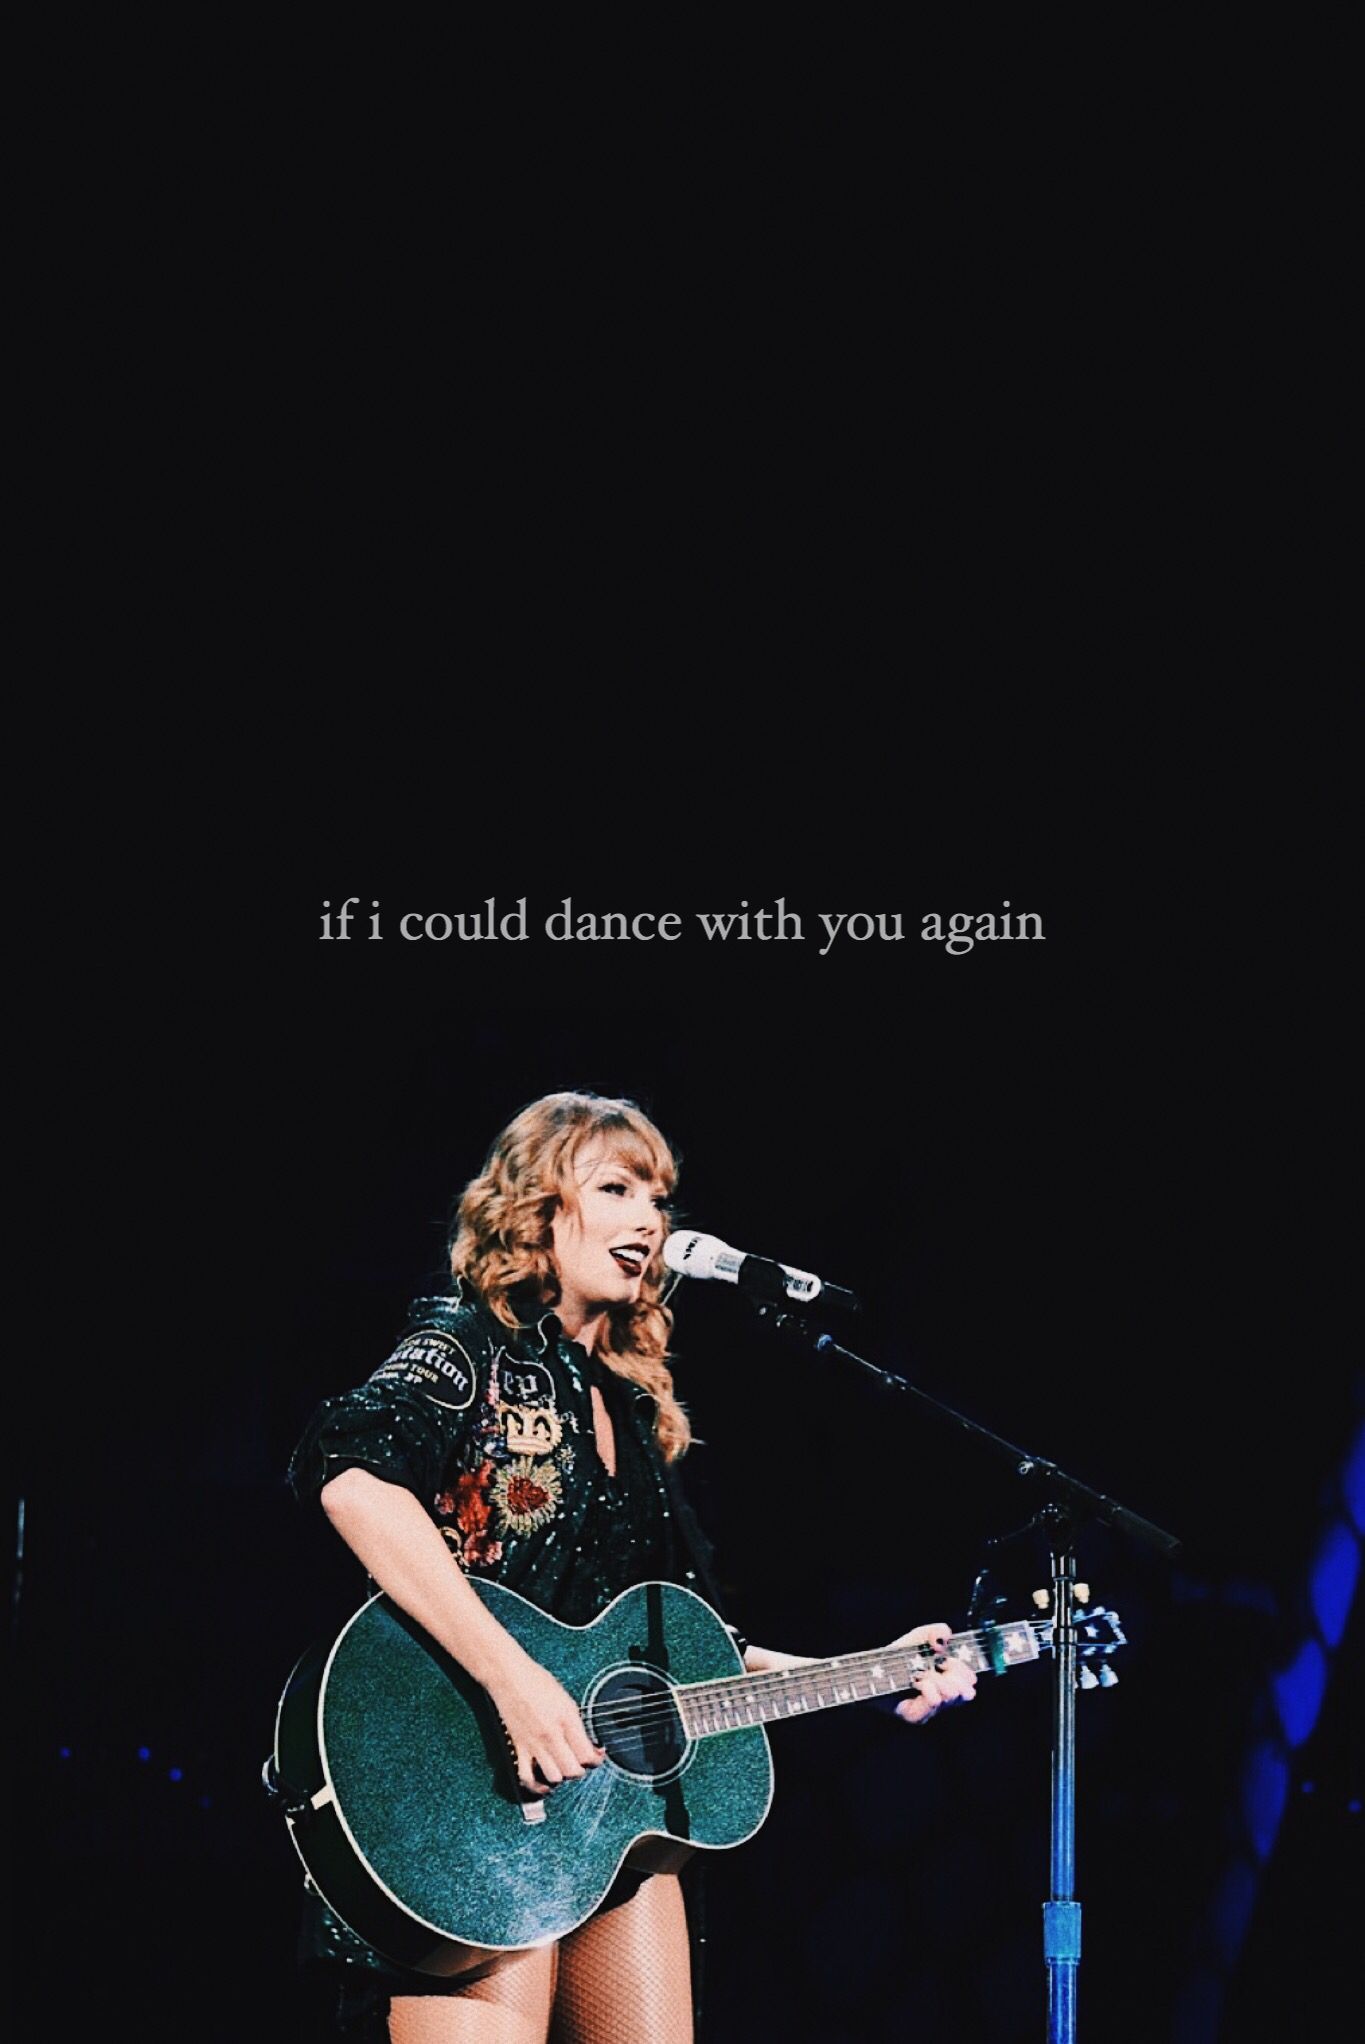 Dancing With Our Hands Tied. reputation. Taylor swift lyrics, Taylor swift wallpaper, Long live taylor swift